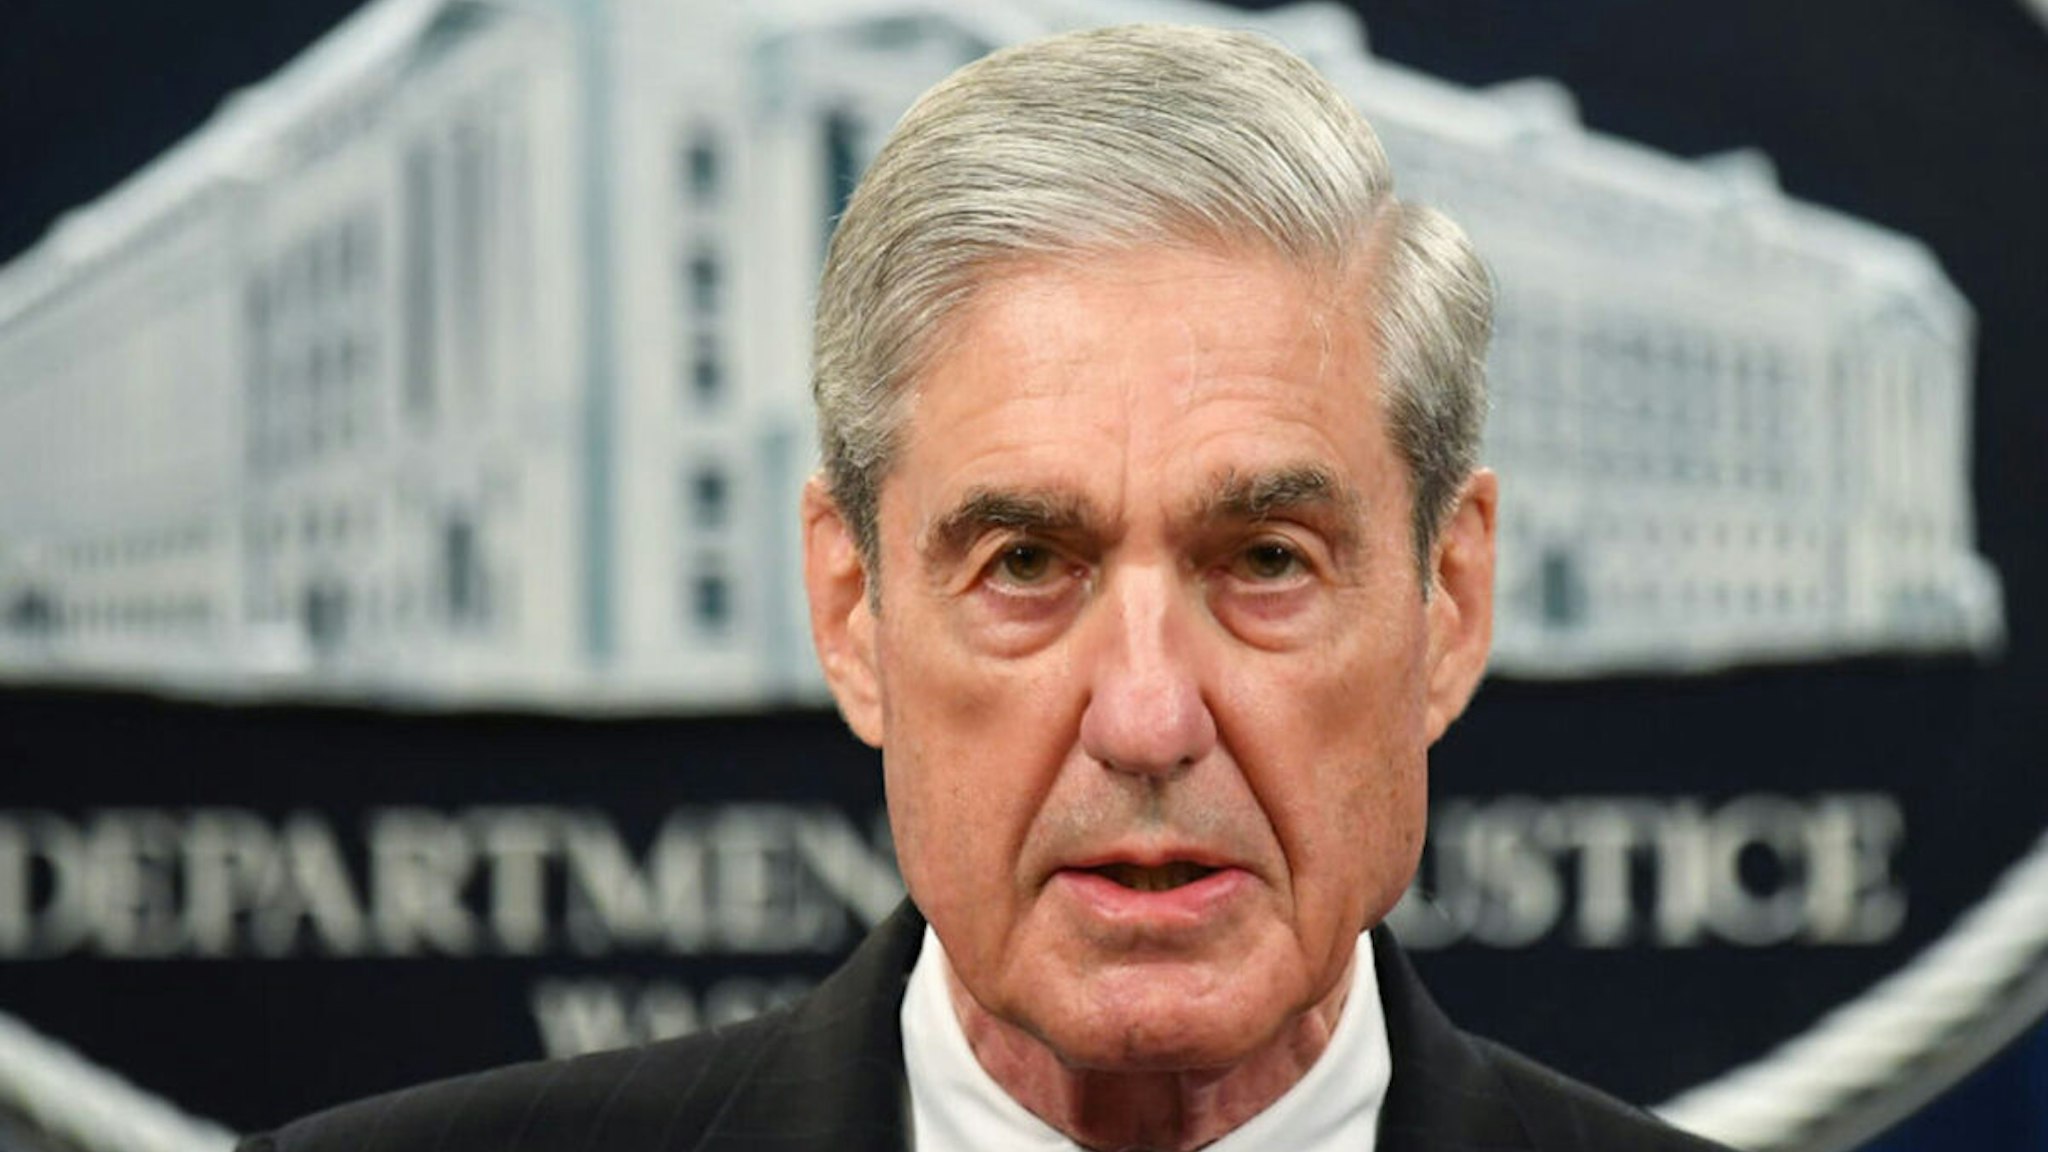 Special Counsel Robert Mueller speaks on the investigation into Russian interference in the 2016 Presidential election, at the US Justice Department in Washington, DC, on May 29, 2019. - Special Counsel Robert Mueller said Wednesday that charging Donald Trump with a crime of obstruction was not an option because of Justice Department policy not to indict a sitting president. (Photo by MANDEL NGAN / AFP)